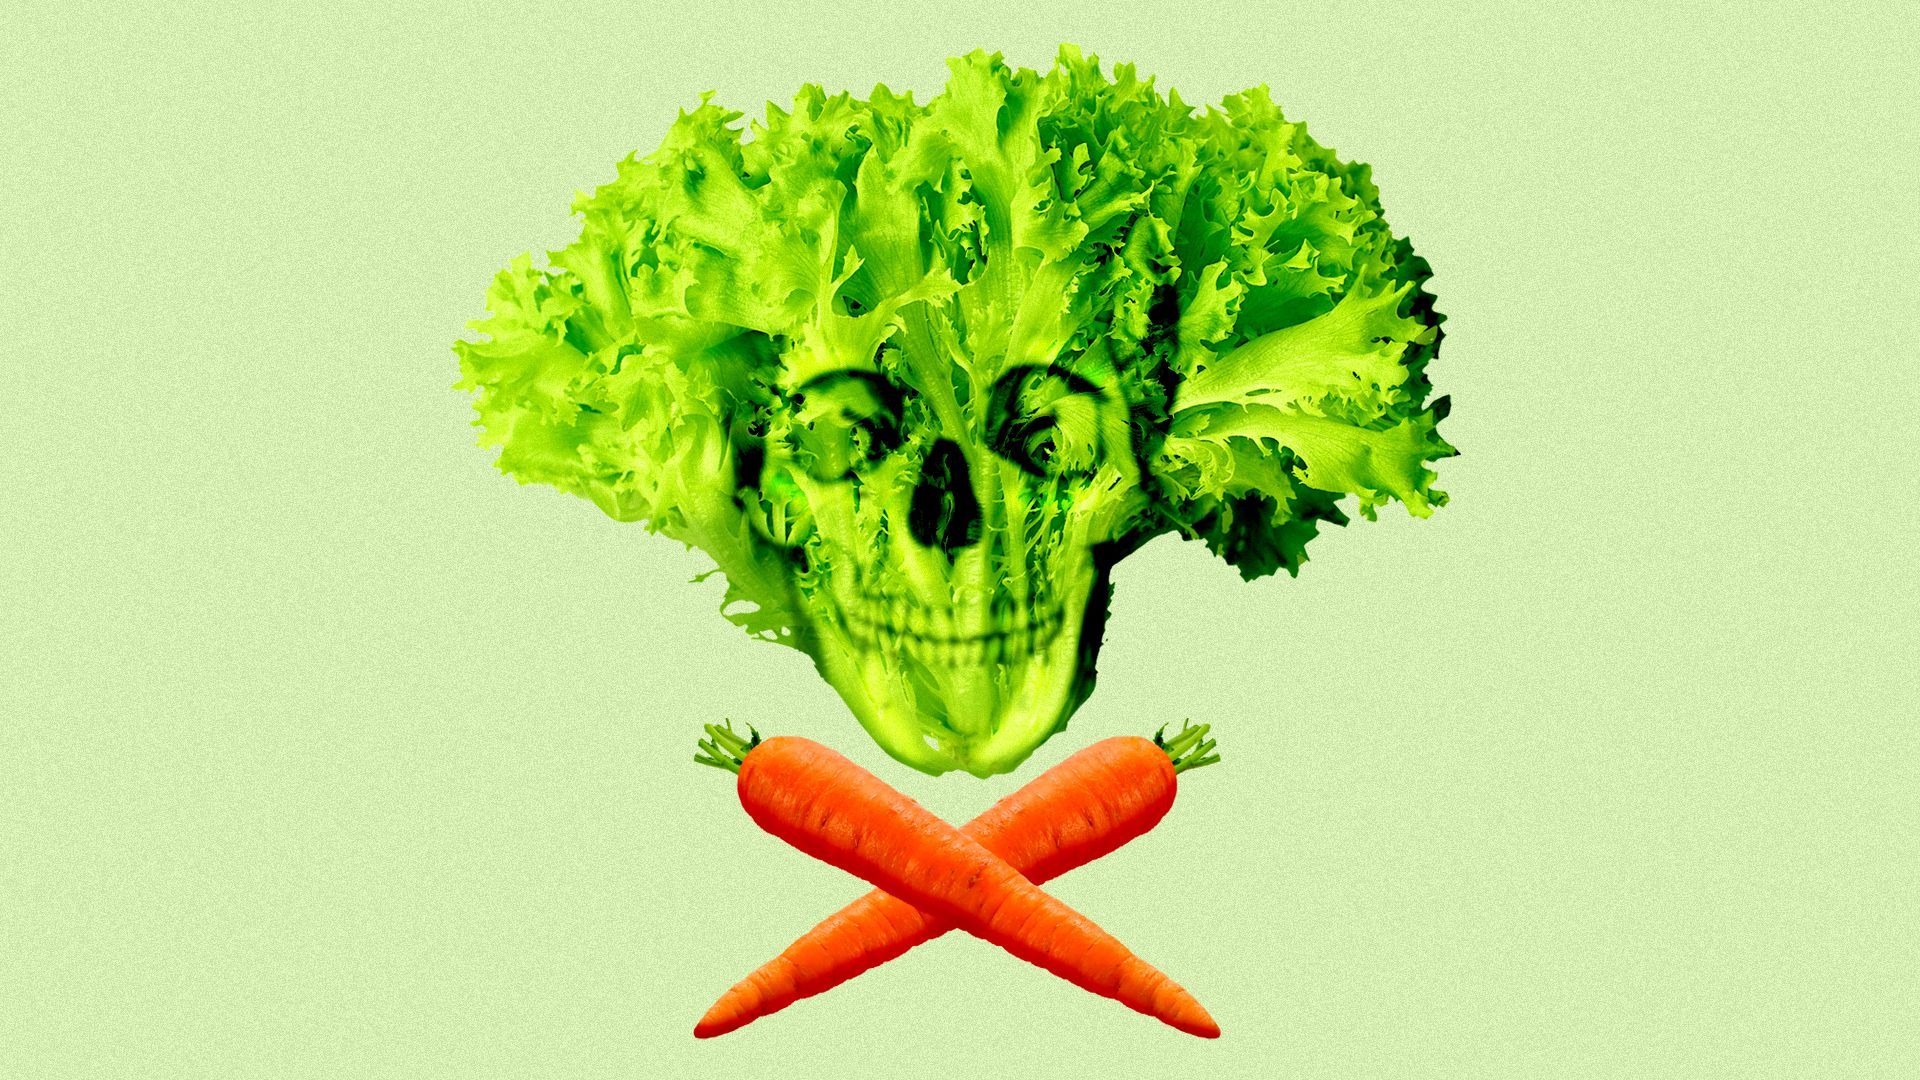 Illustration of a head of lettuce and carrots as a skull and crossbones 